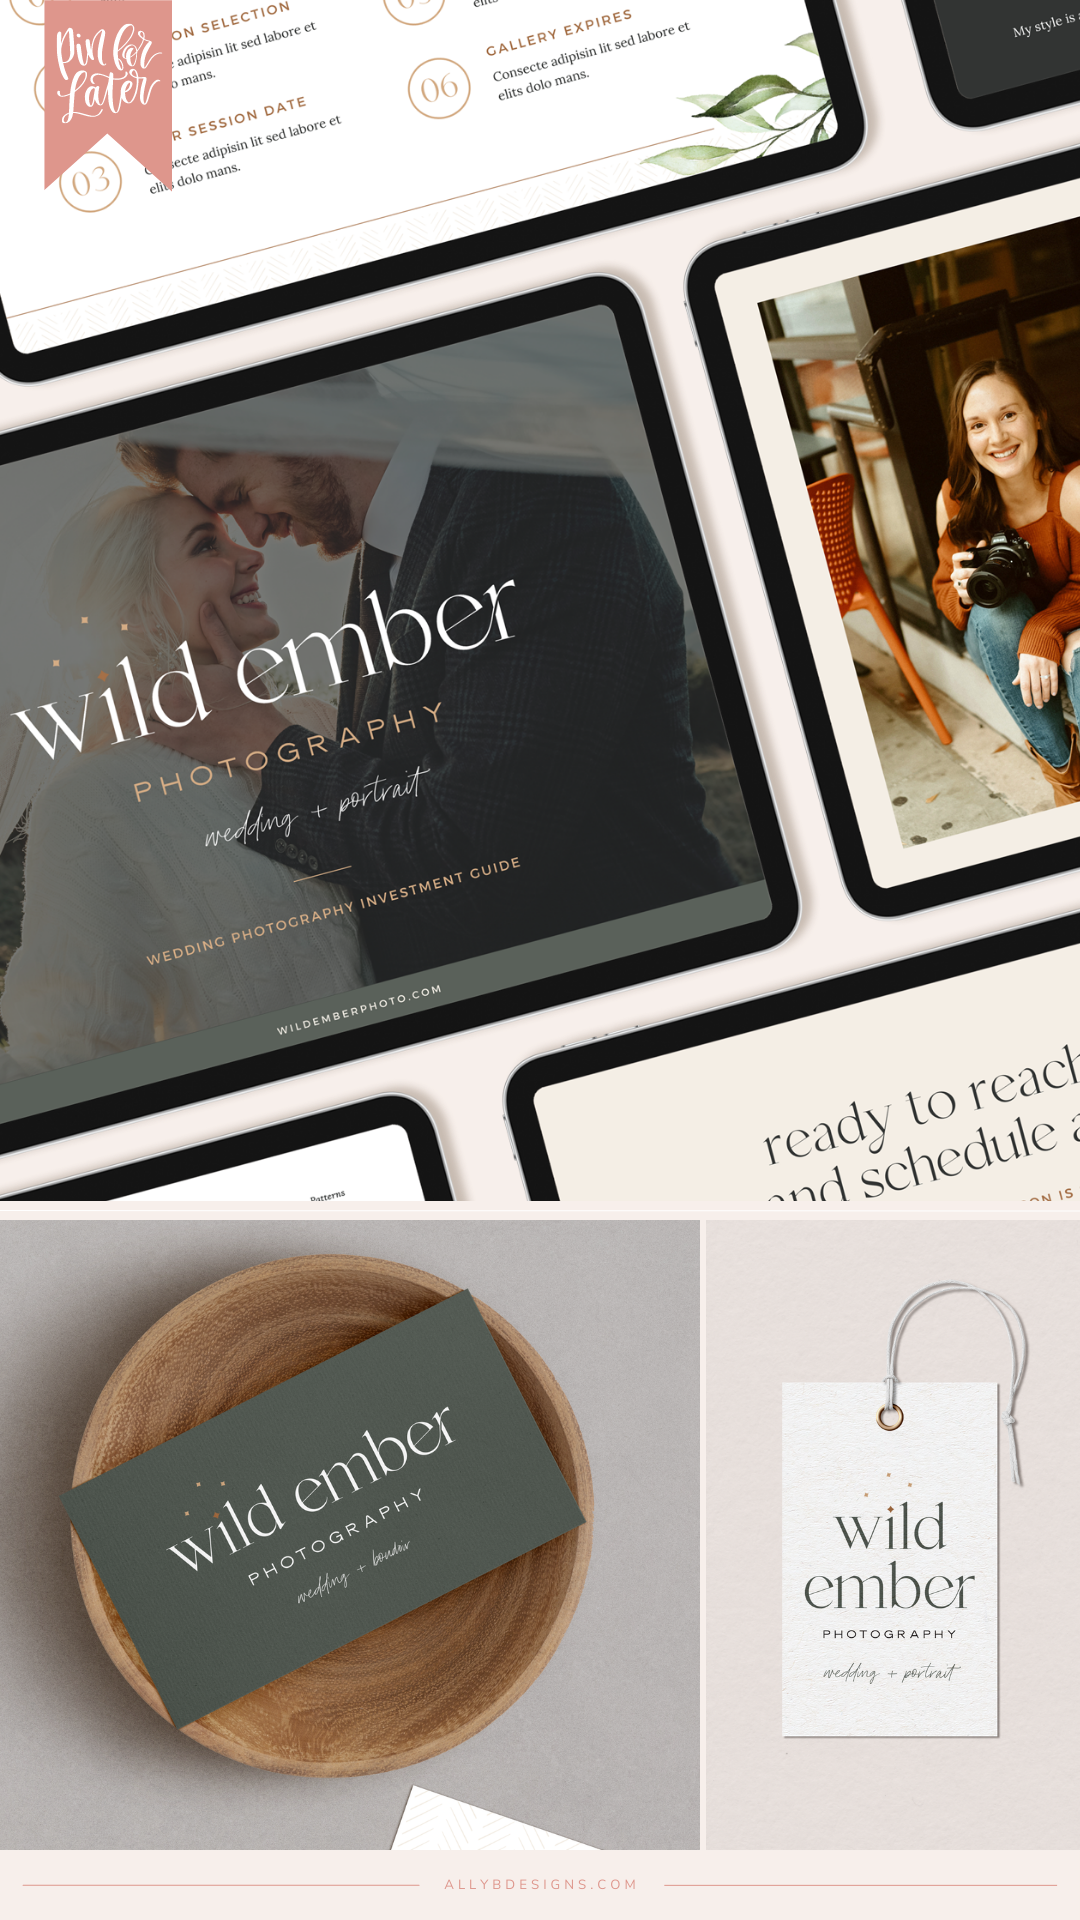 An Elopement and Wedding Photographer Pricing Guide: Wild Ember Photography. Branding and Design by Ally B Designs